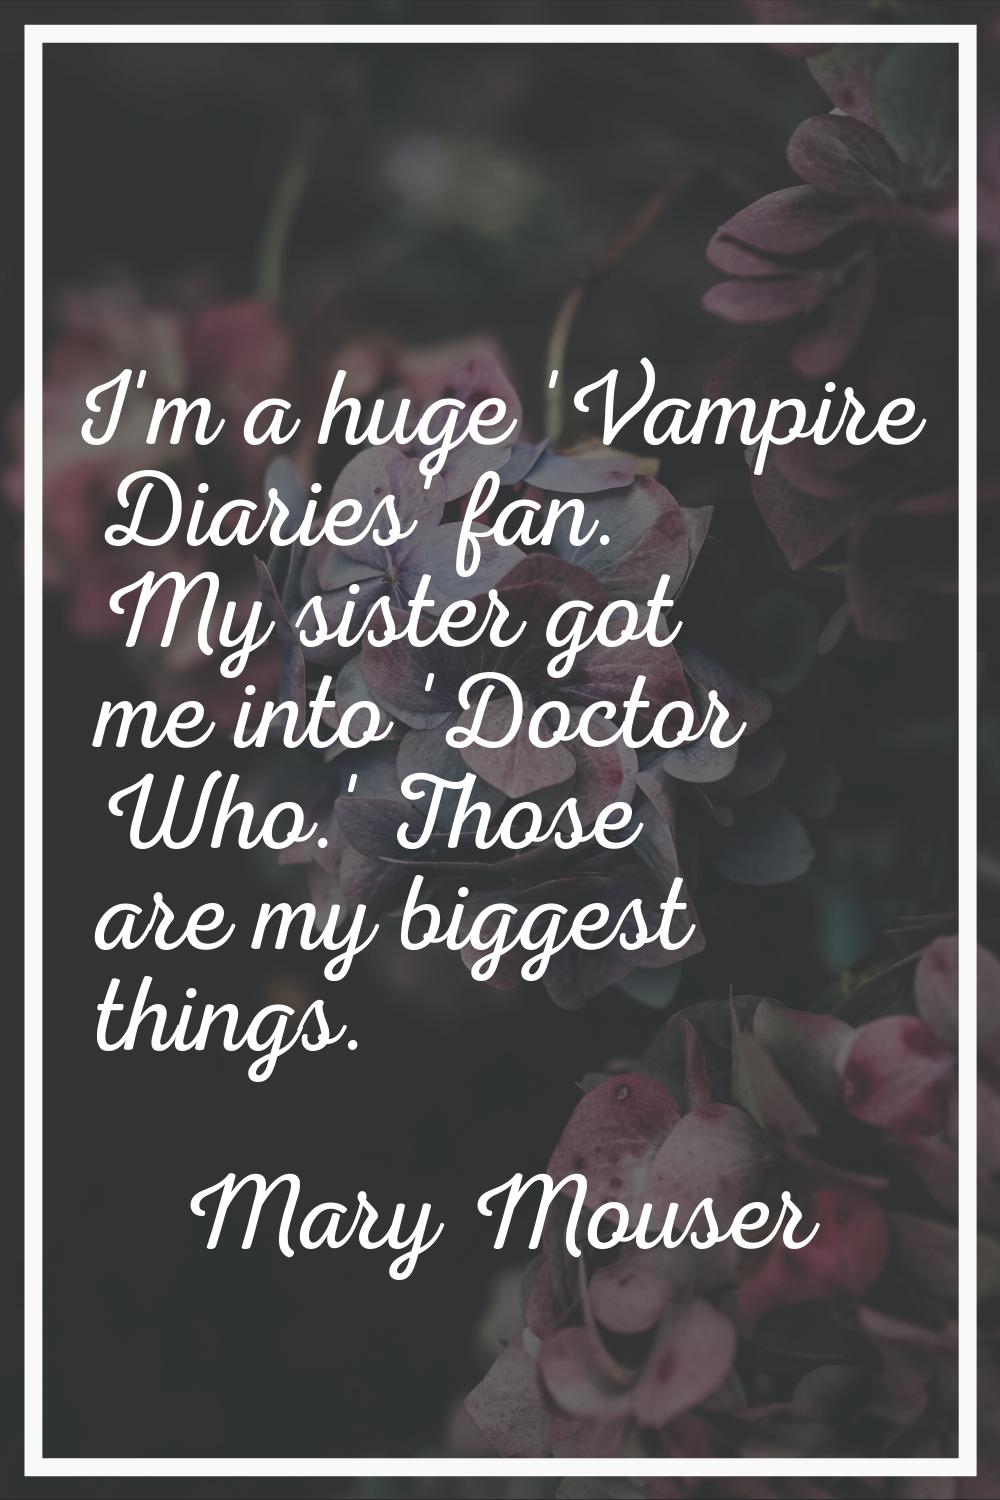 I'm a huge 'Vampire Diaries' fan. My sister got me into 'Doctor Who.' Those are my biggest things.